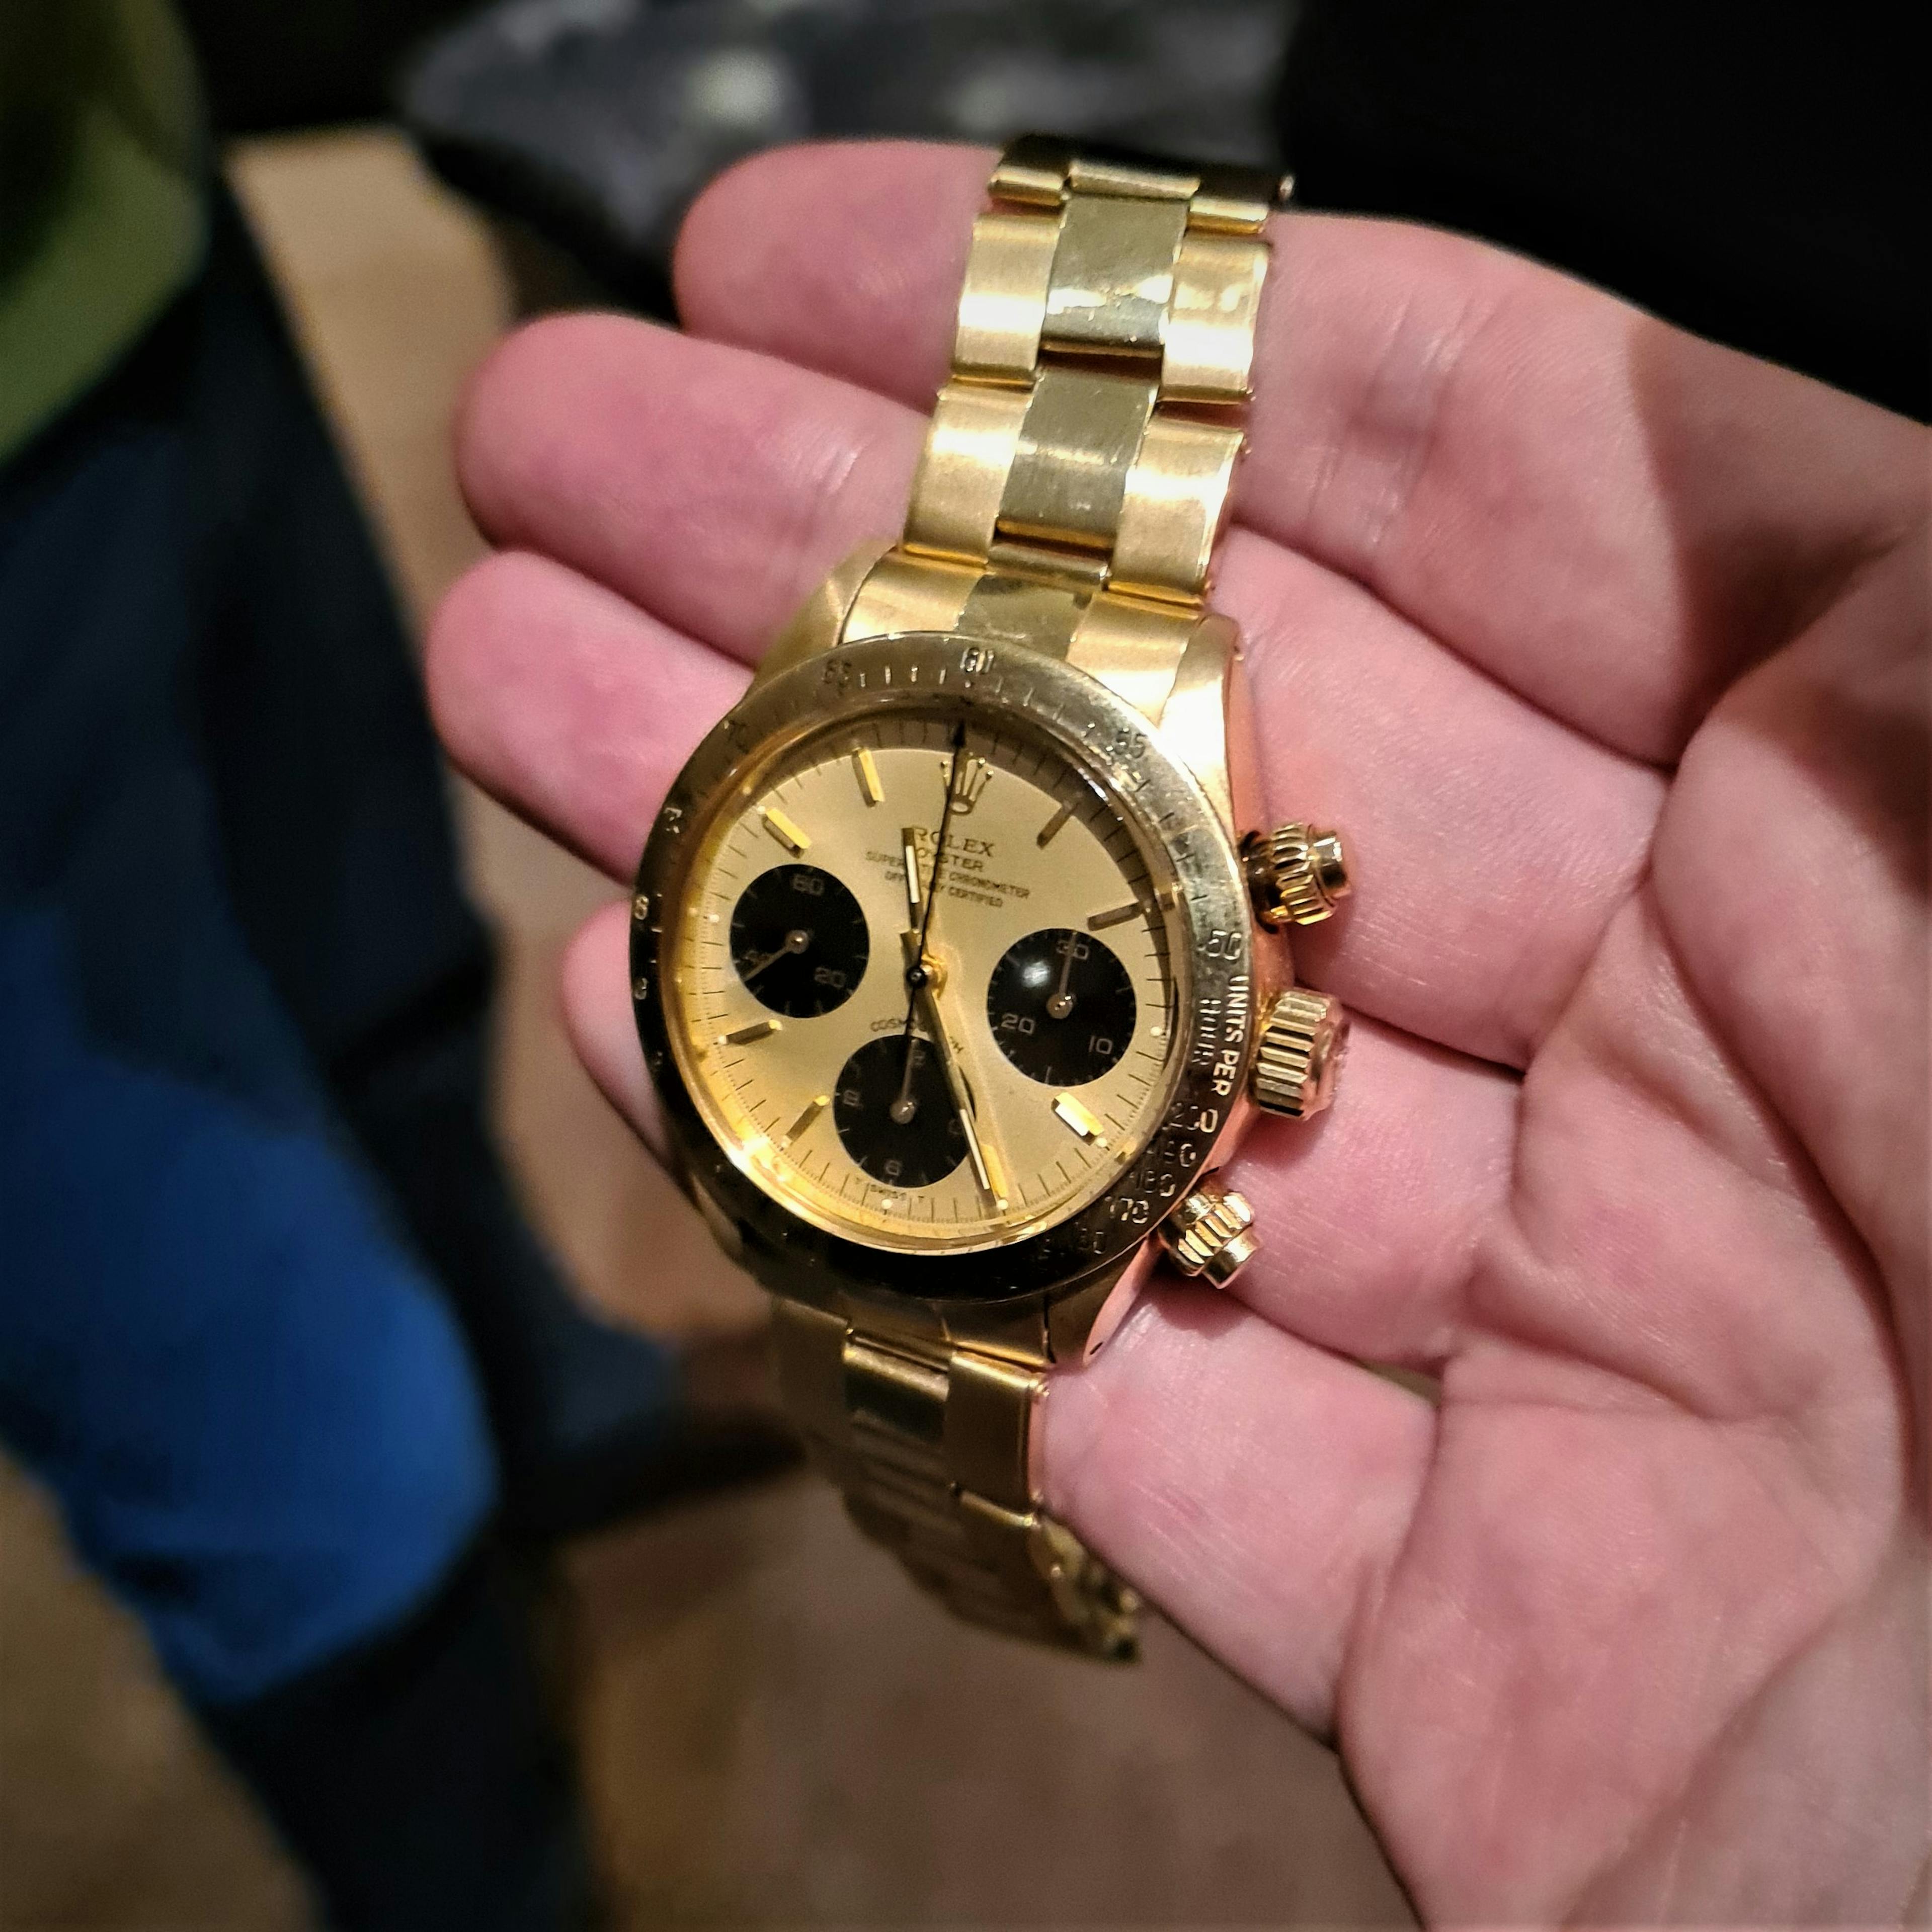 Solid Gold Rolex Daytona with Gold Dial and Black Subdials